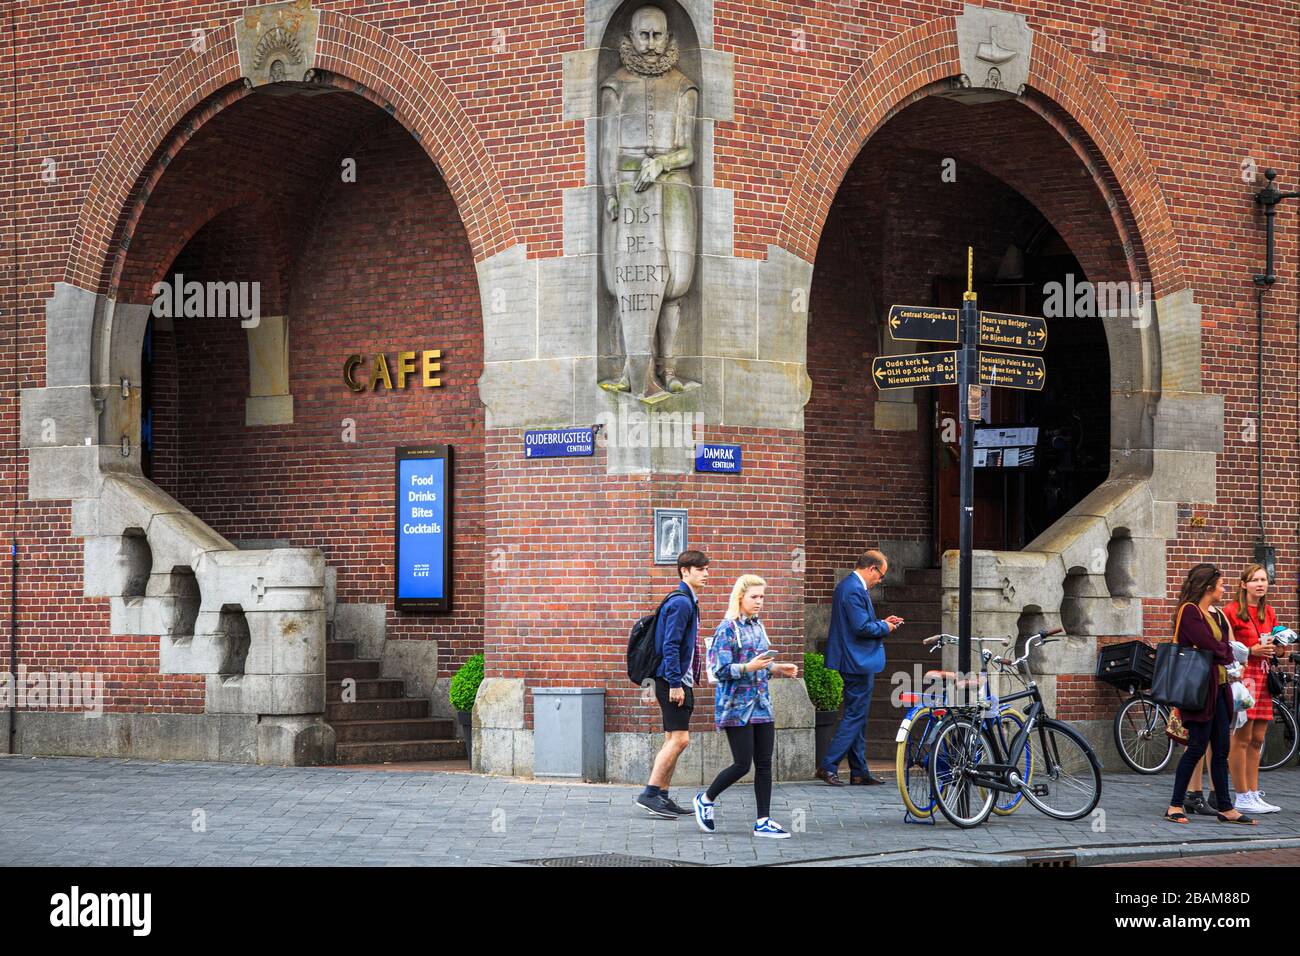 The New York Film Academy Café entrance, located between Oudebrugsteeg and Damrak, with tourists and bicycles. Stock Photo